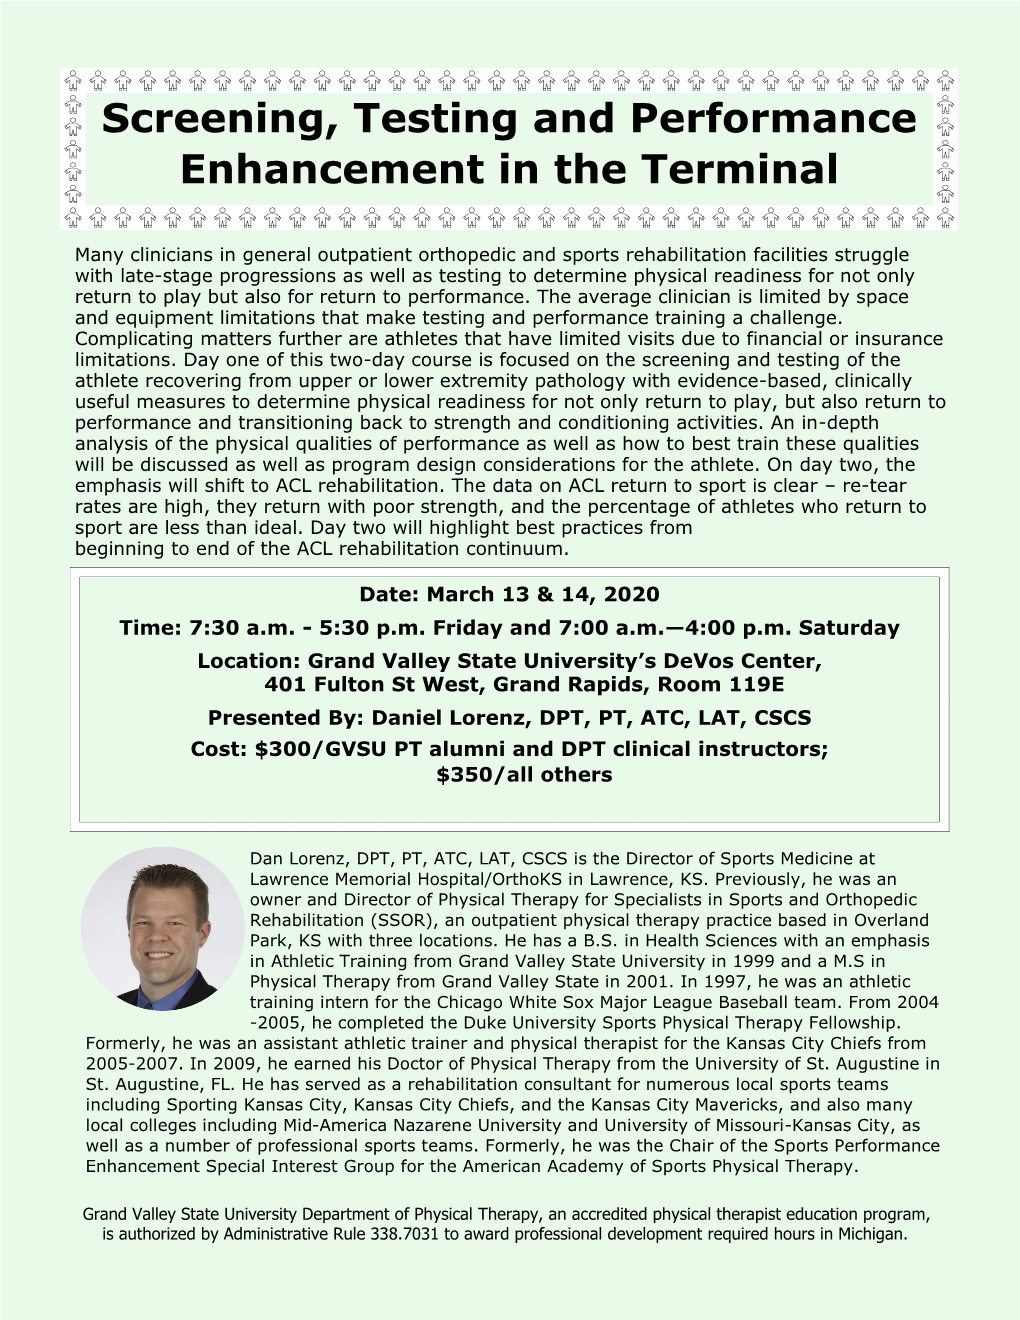 Screening, Testing and Performance Enhancement in the Terminal